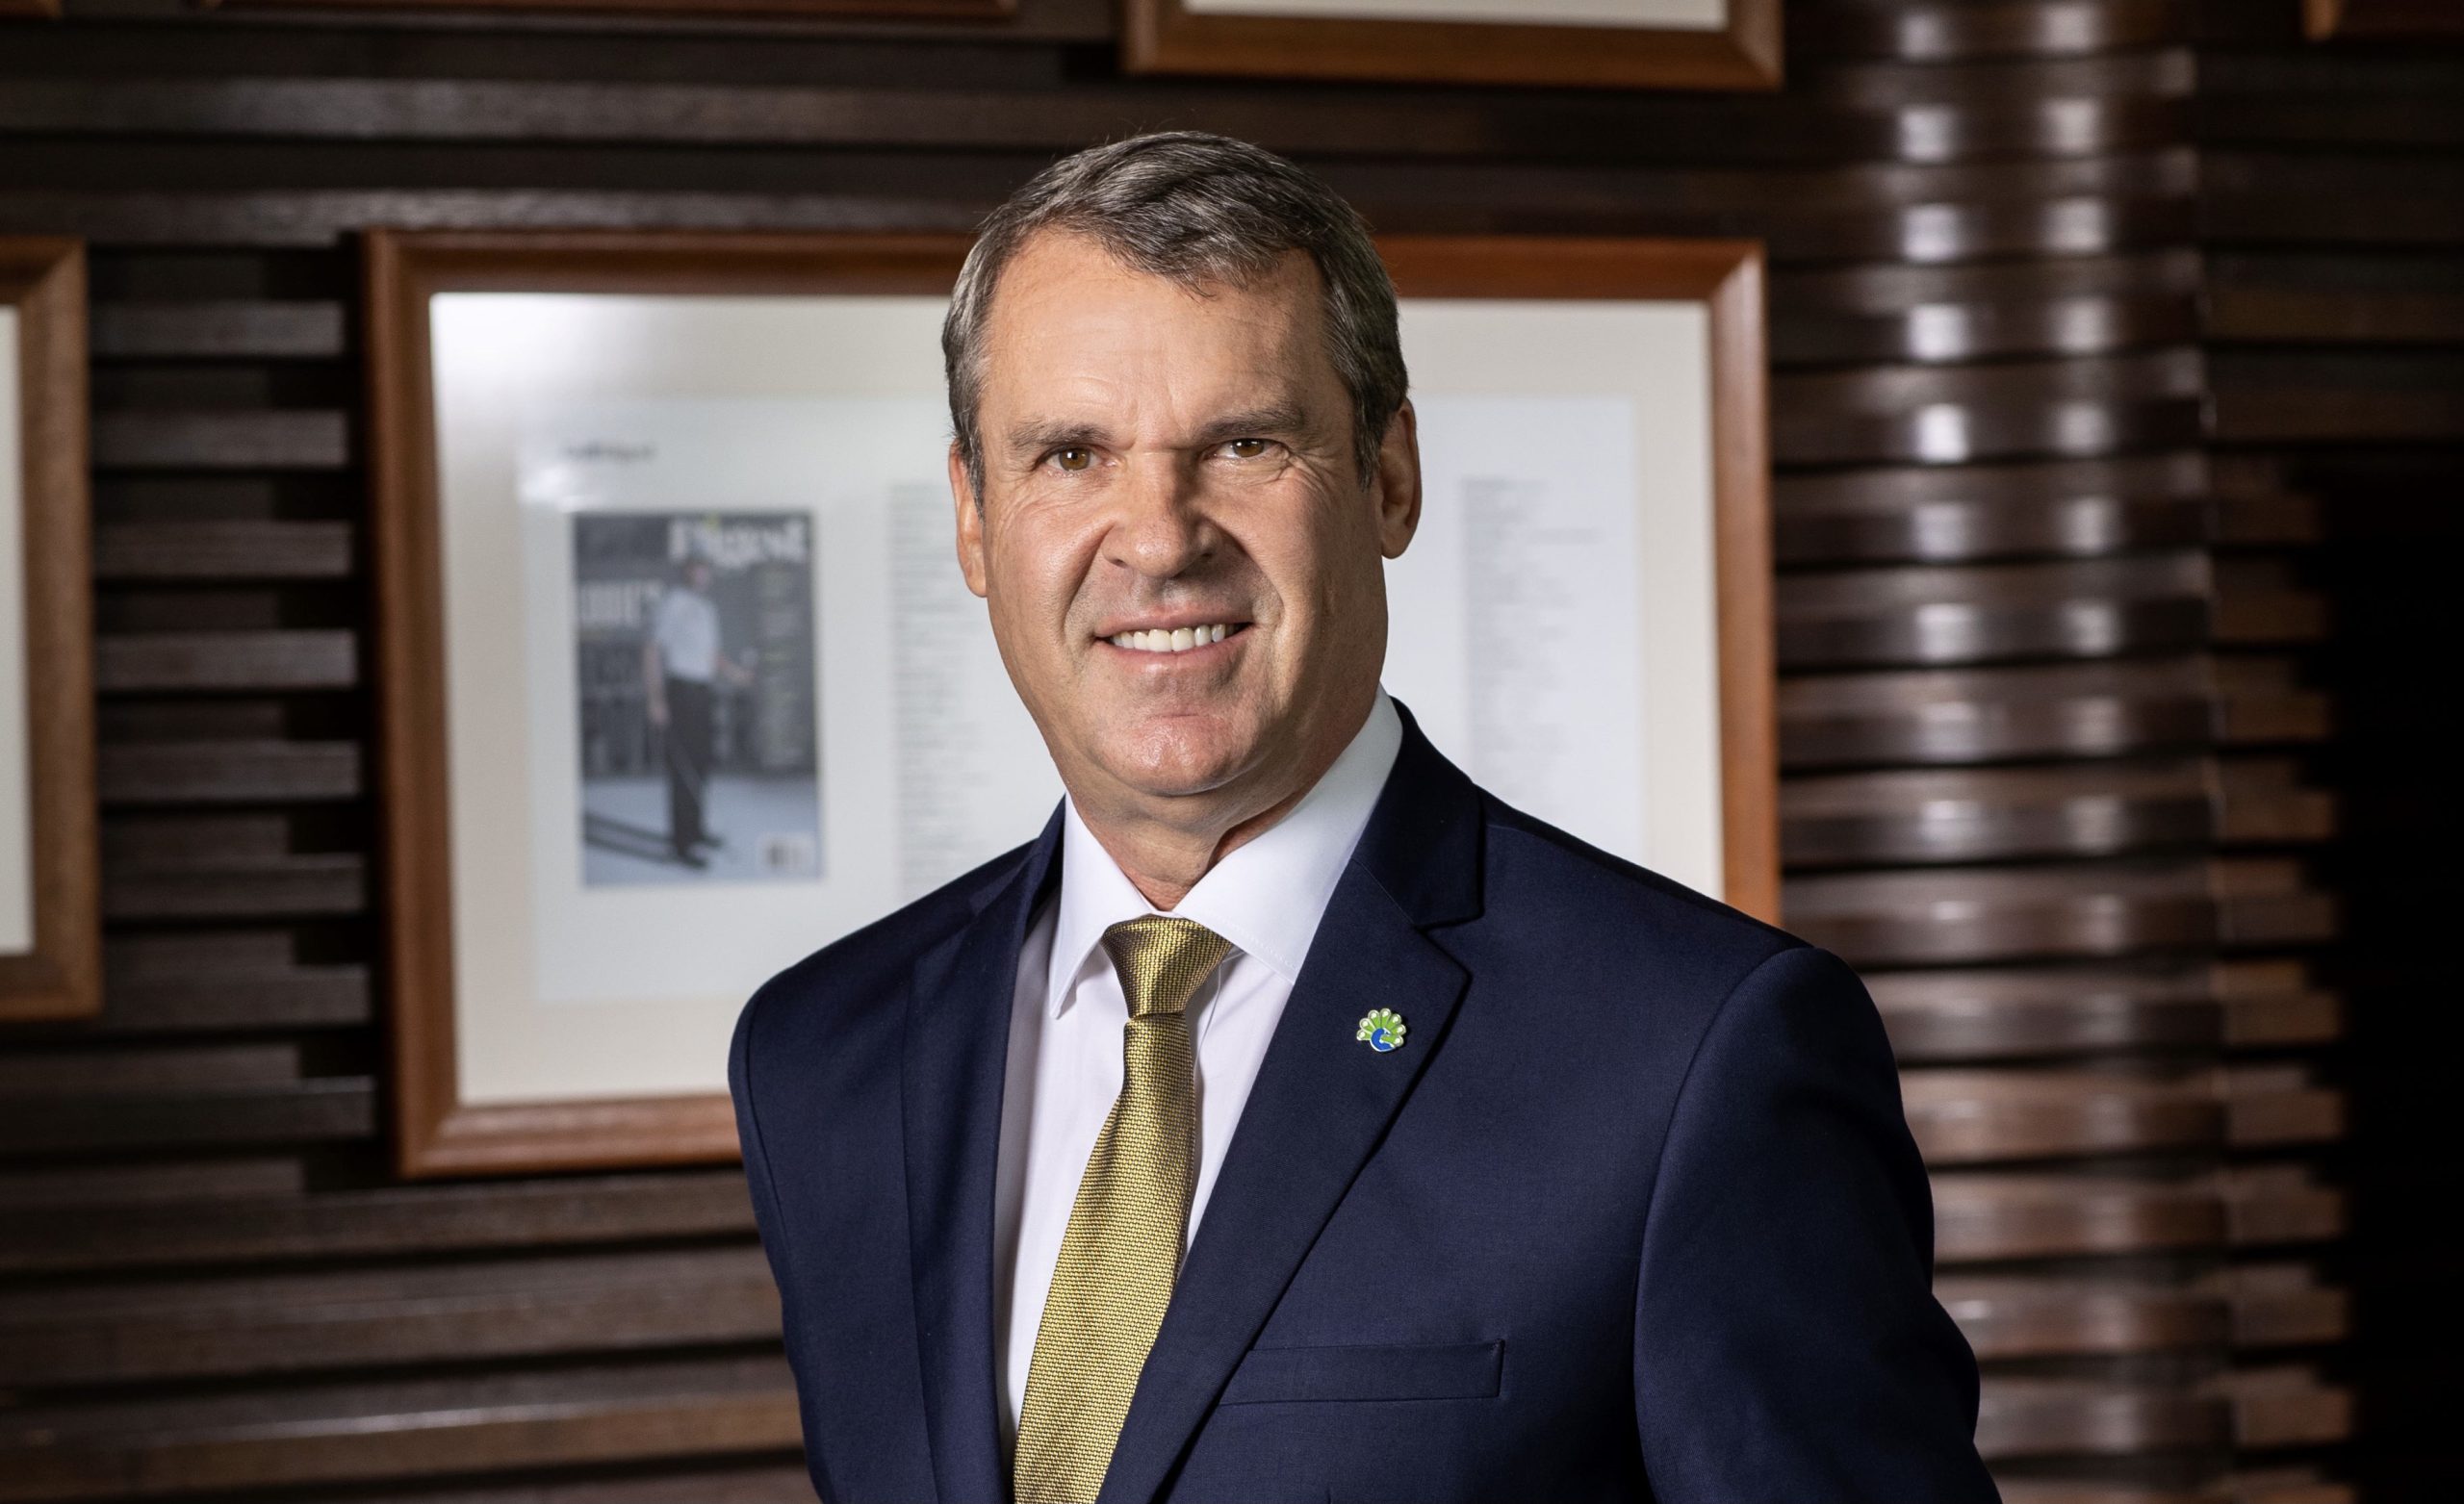 Andrew Johnston – General Manager, Director of Agronomy and Resident Golf Course Designer at Sentosa Golf Club has been named as one of the ‘Most Innovative People in Golf’ 2